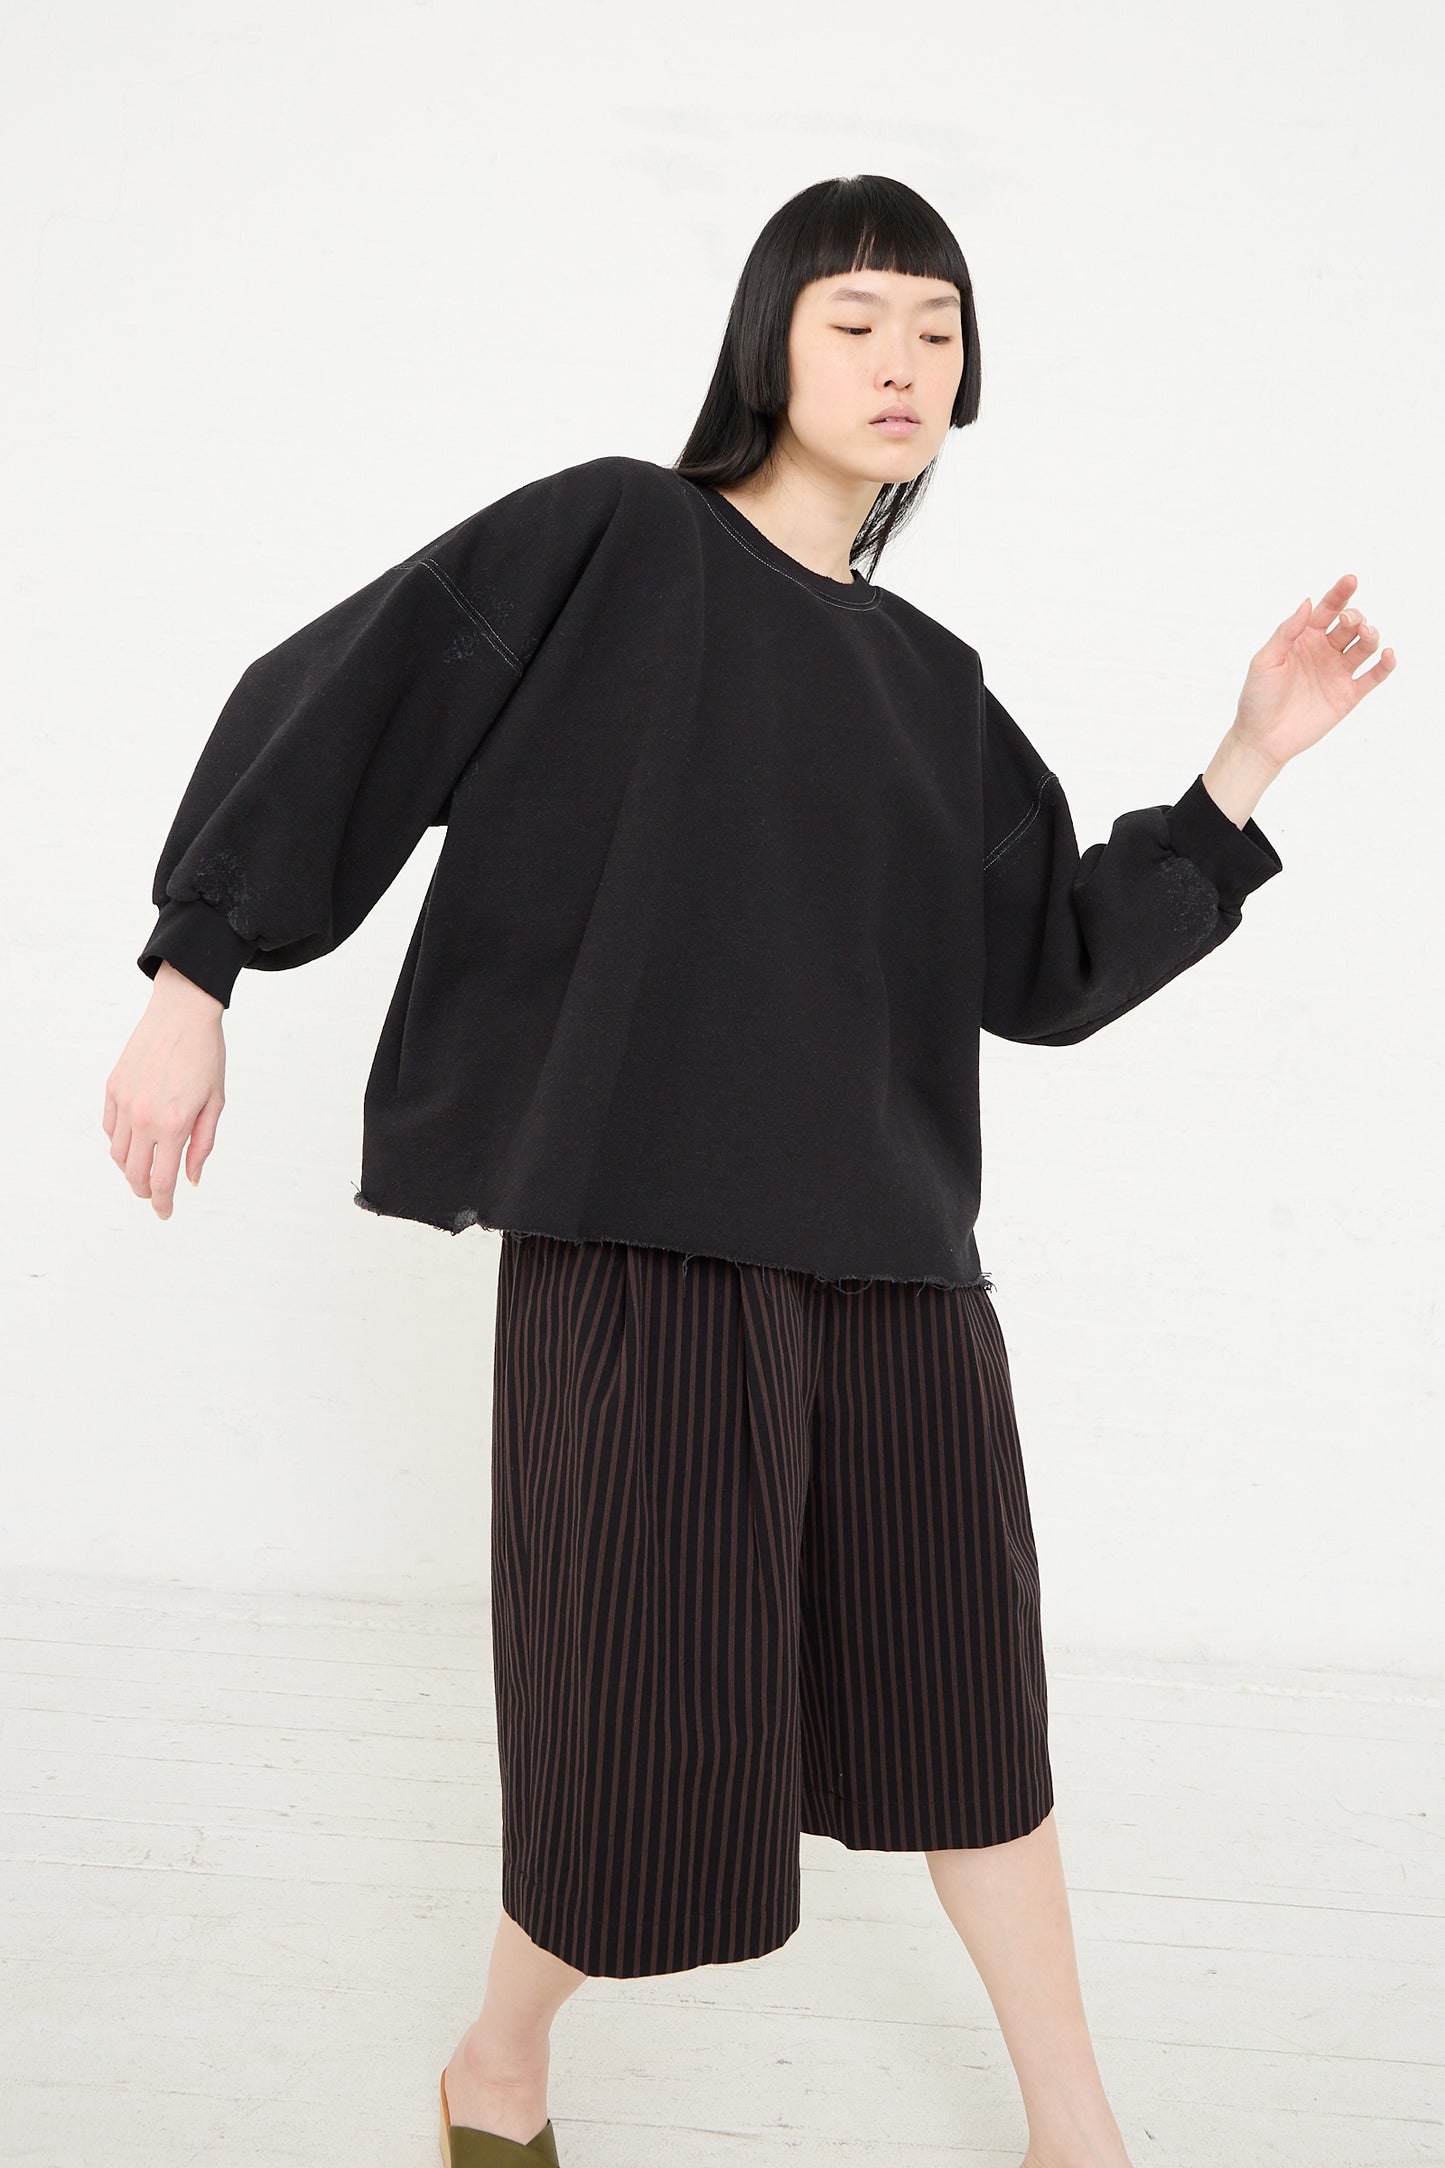 Woman in Rachel Comey's Fond Sweatshirt in Charcoal and striped shorts posing against a white background.